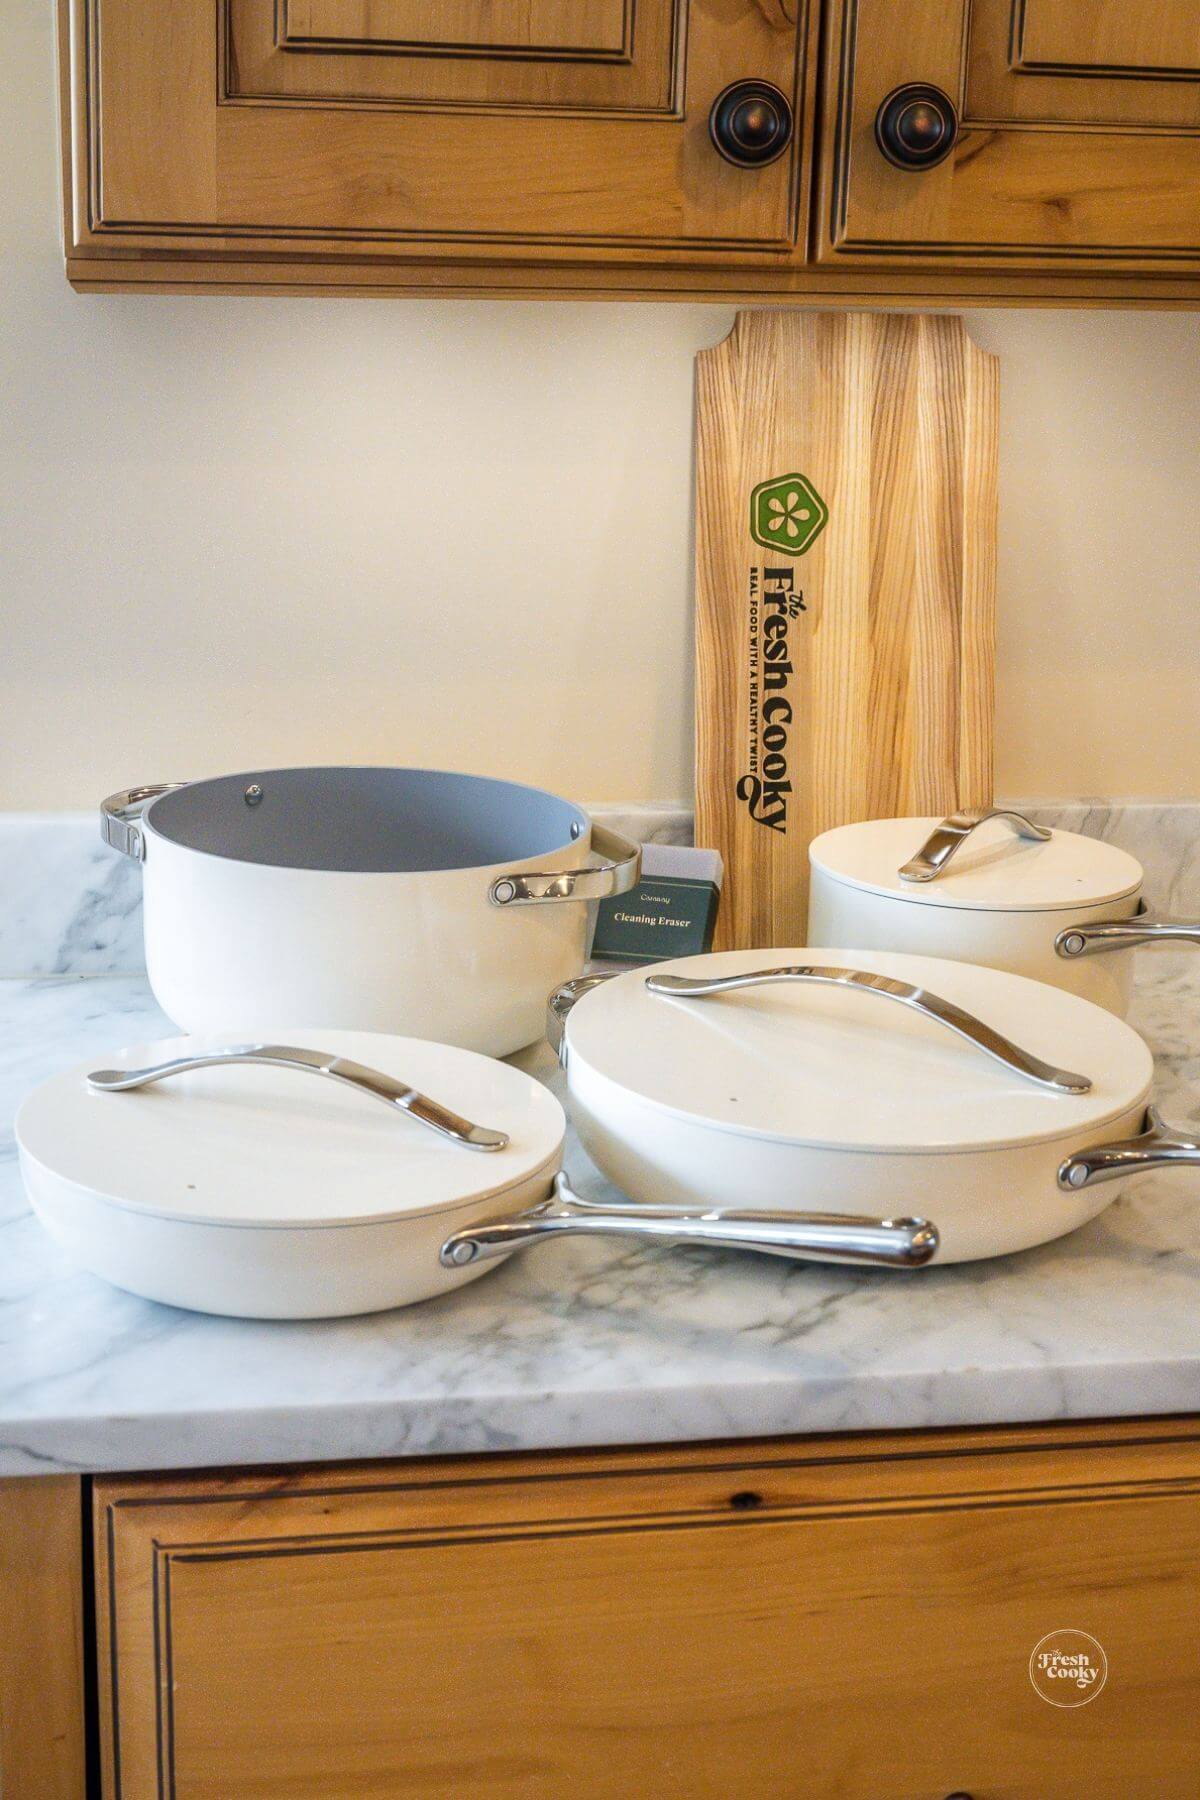 6-Month Caraway Home Cookware Review - Dream Green DIY